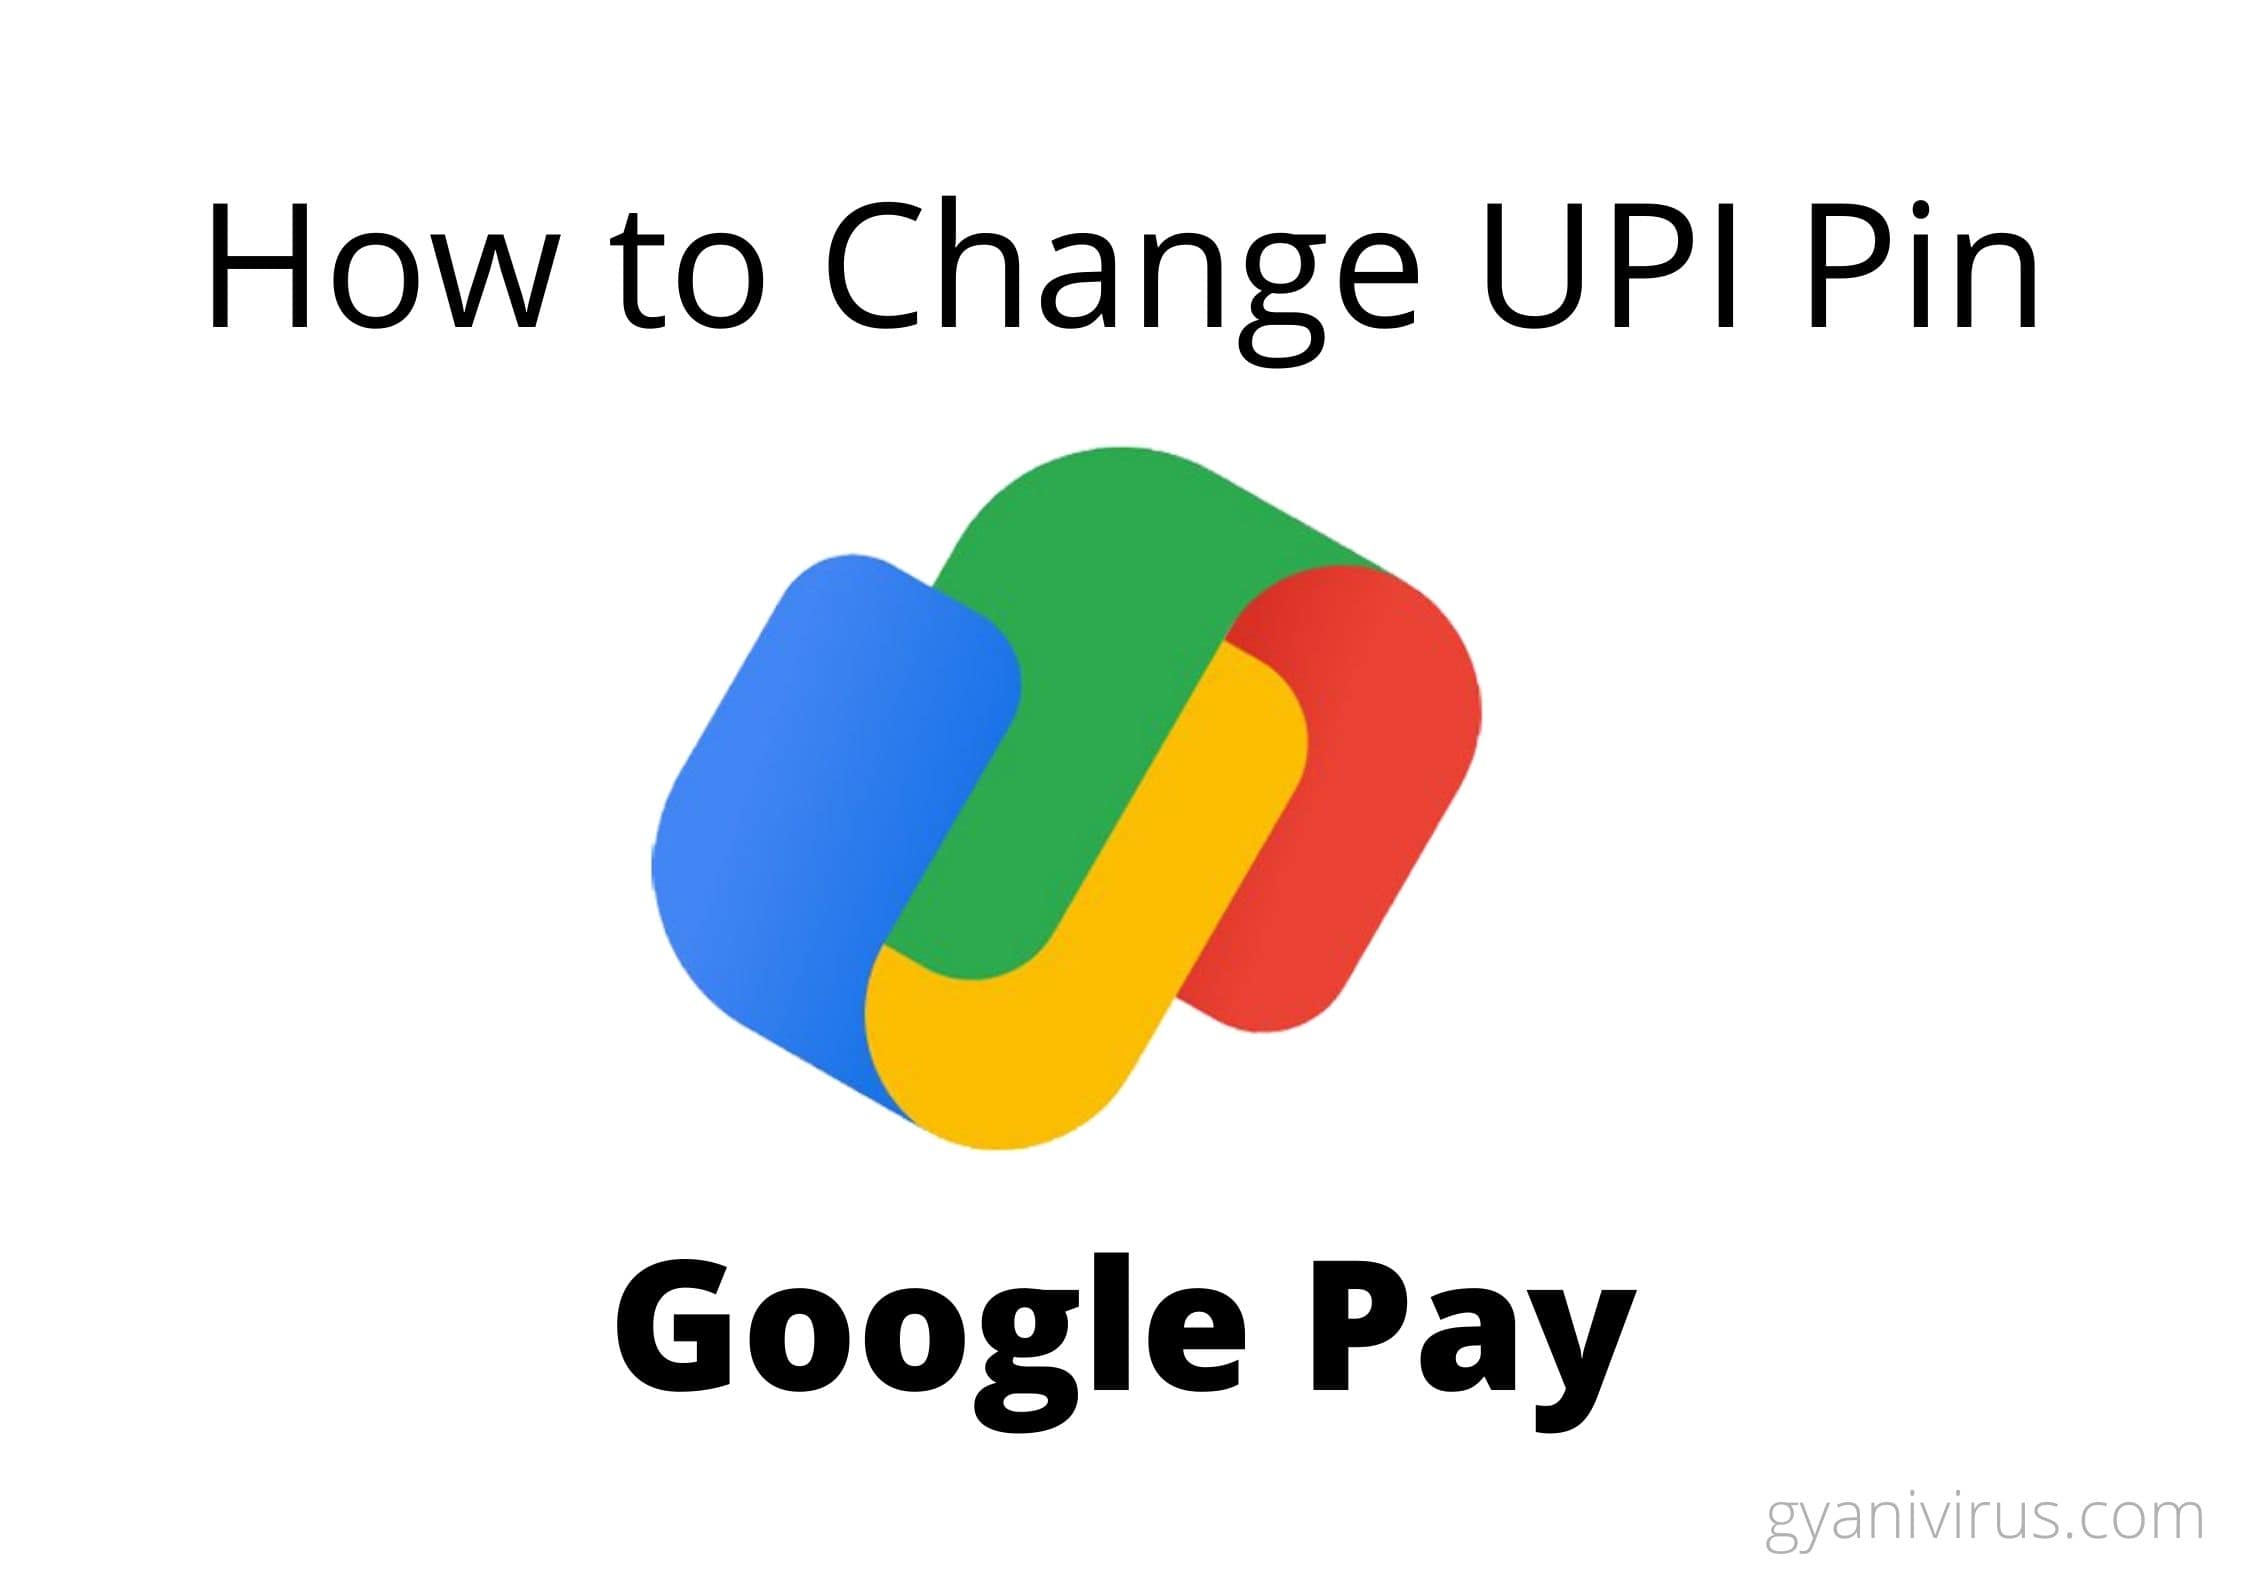 How to Change UPI Pin in Google Pay